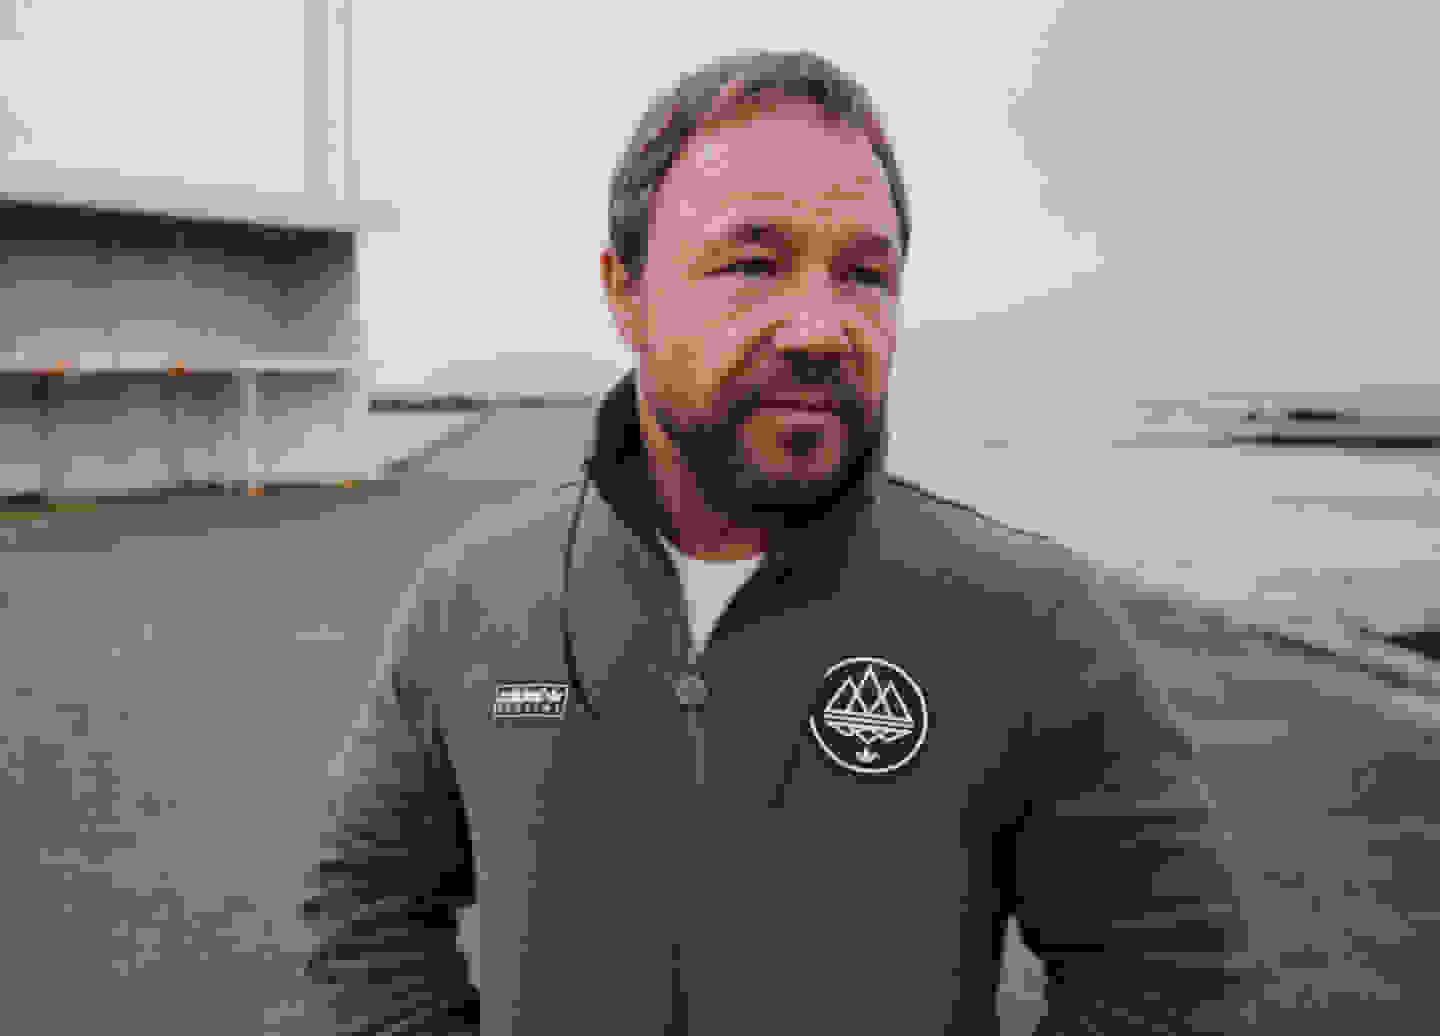 Stephen Graham stands in an industrial landscape and gazes into the distance while wearing the Pre-Spring 2023 adidas Spezial collection.